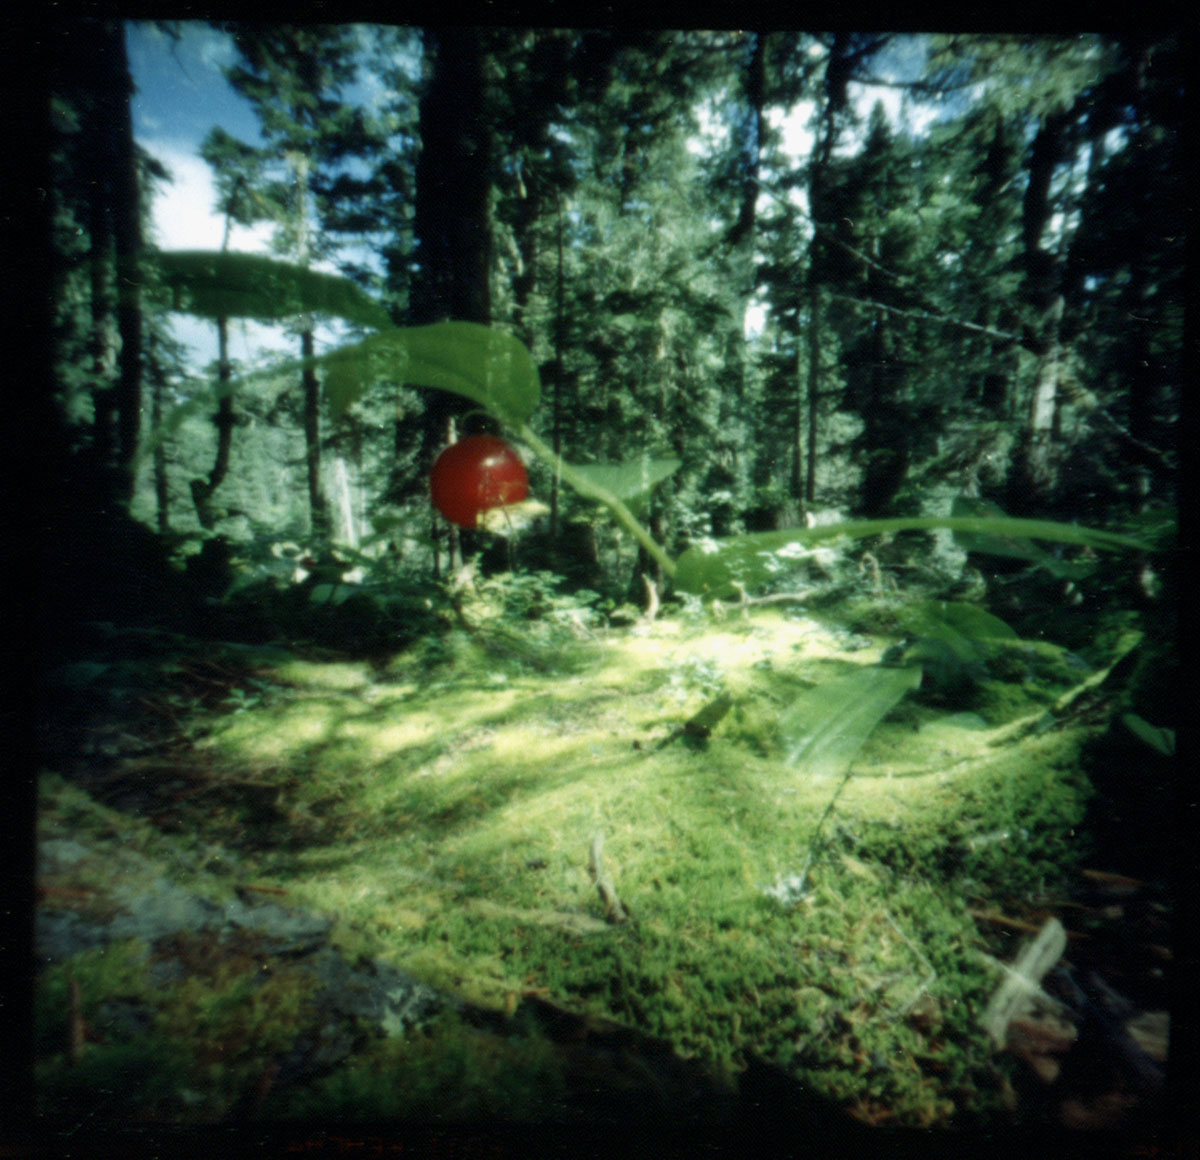 wheeler-hut-expedition_02_berry-clearing_rogers-pass-alberta_2000_dianne-bos